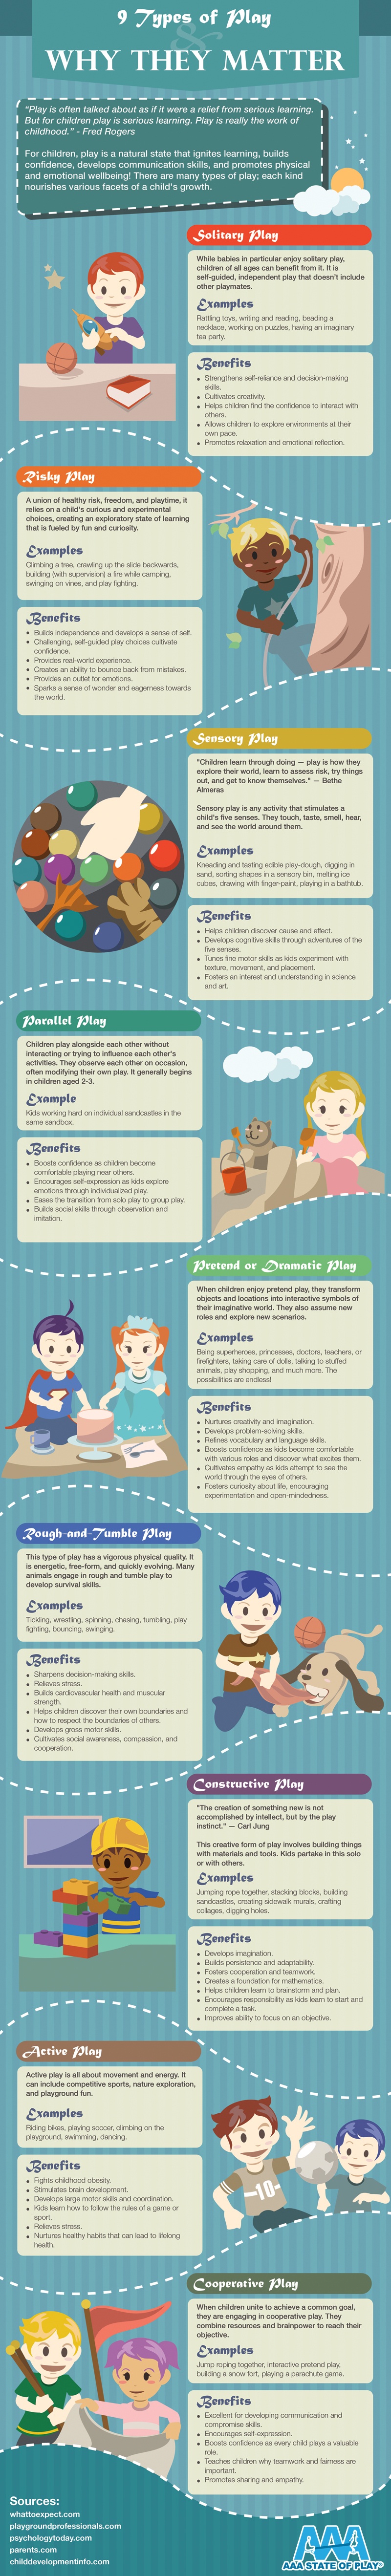 9 Types of Play and Why They Matter Infographic